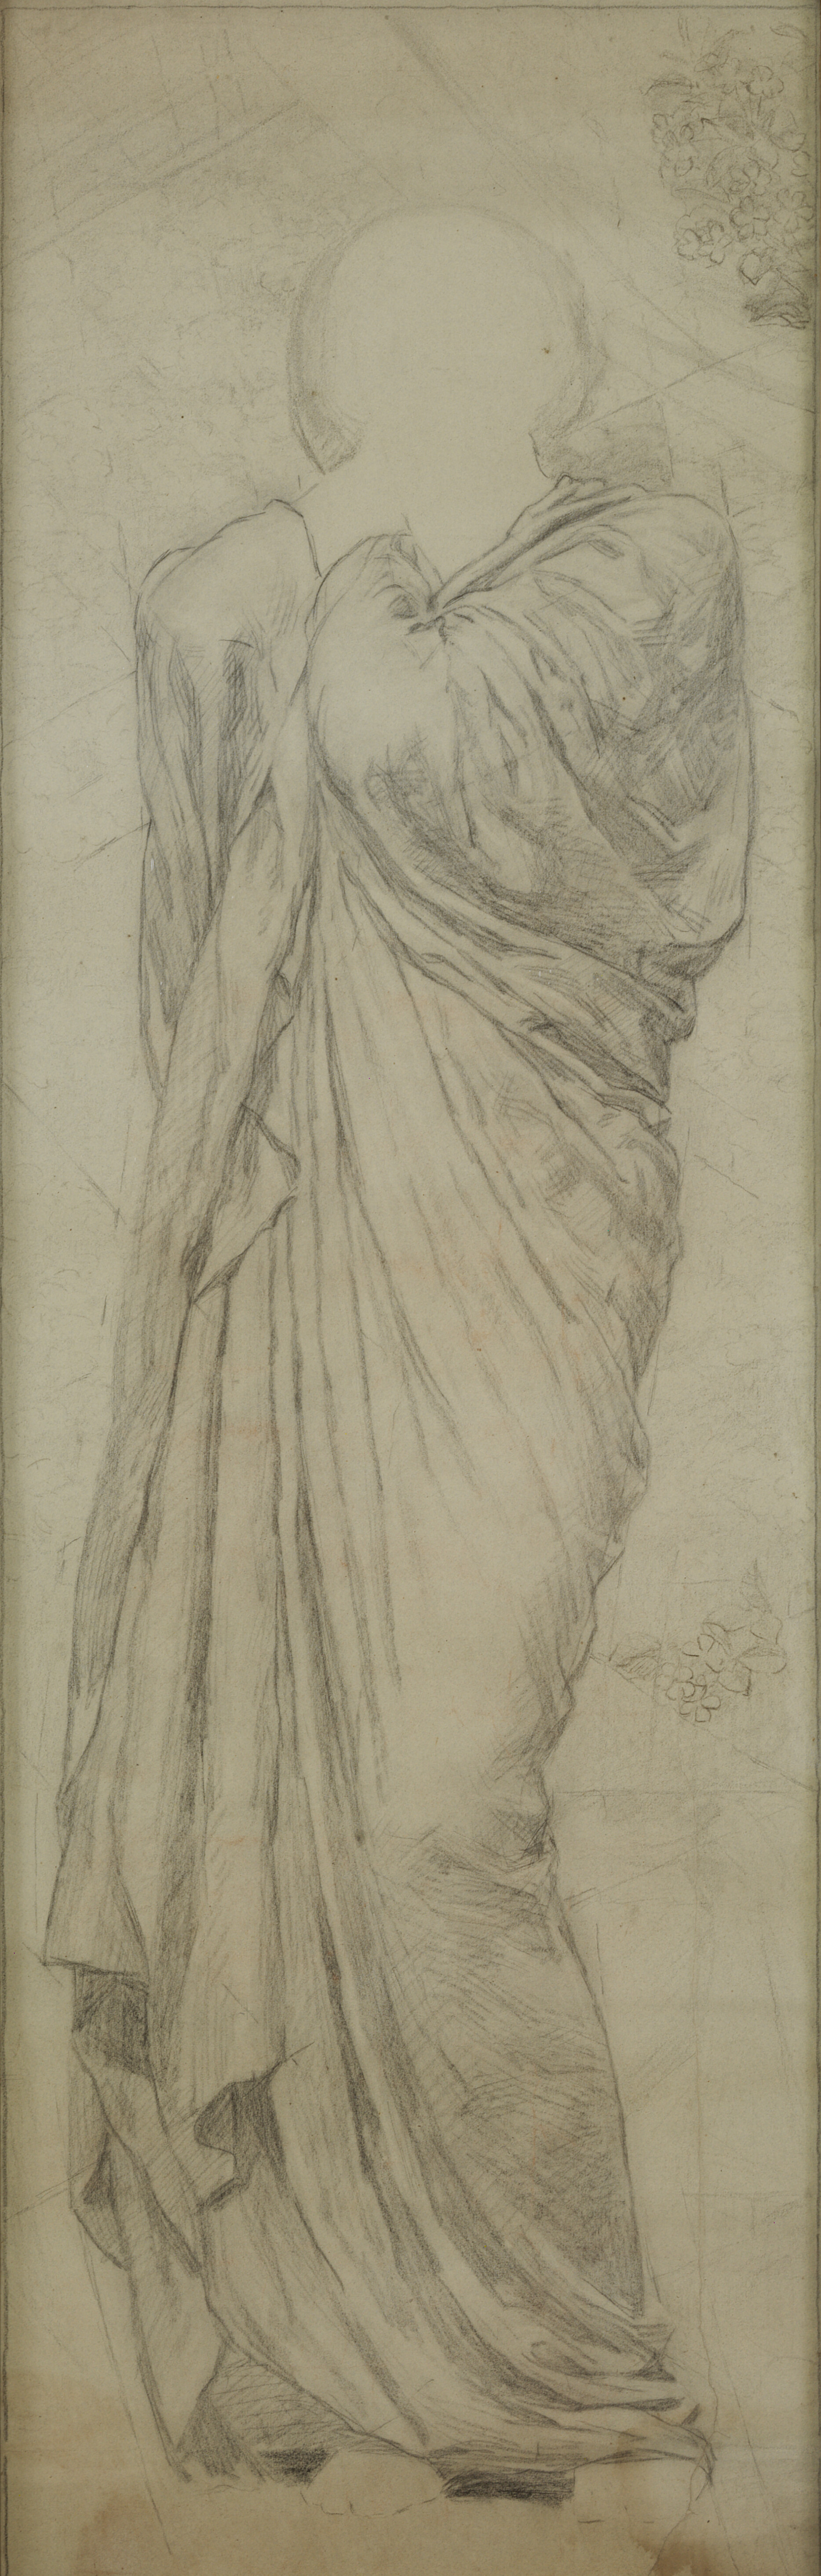 A full-length rendered charcoal illustration of a robe. The female figure wearing the garment has been removed.